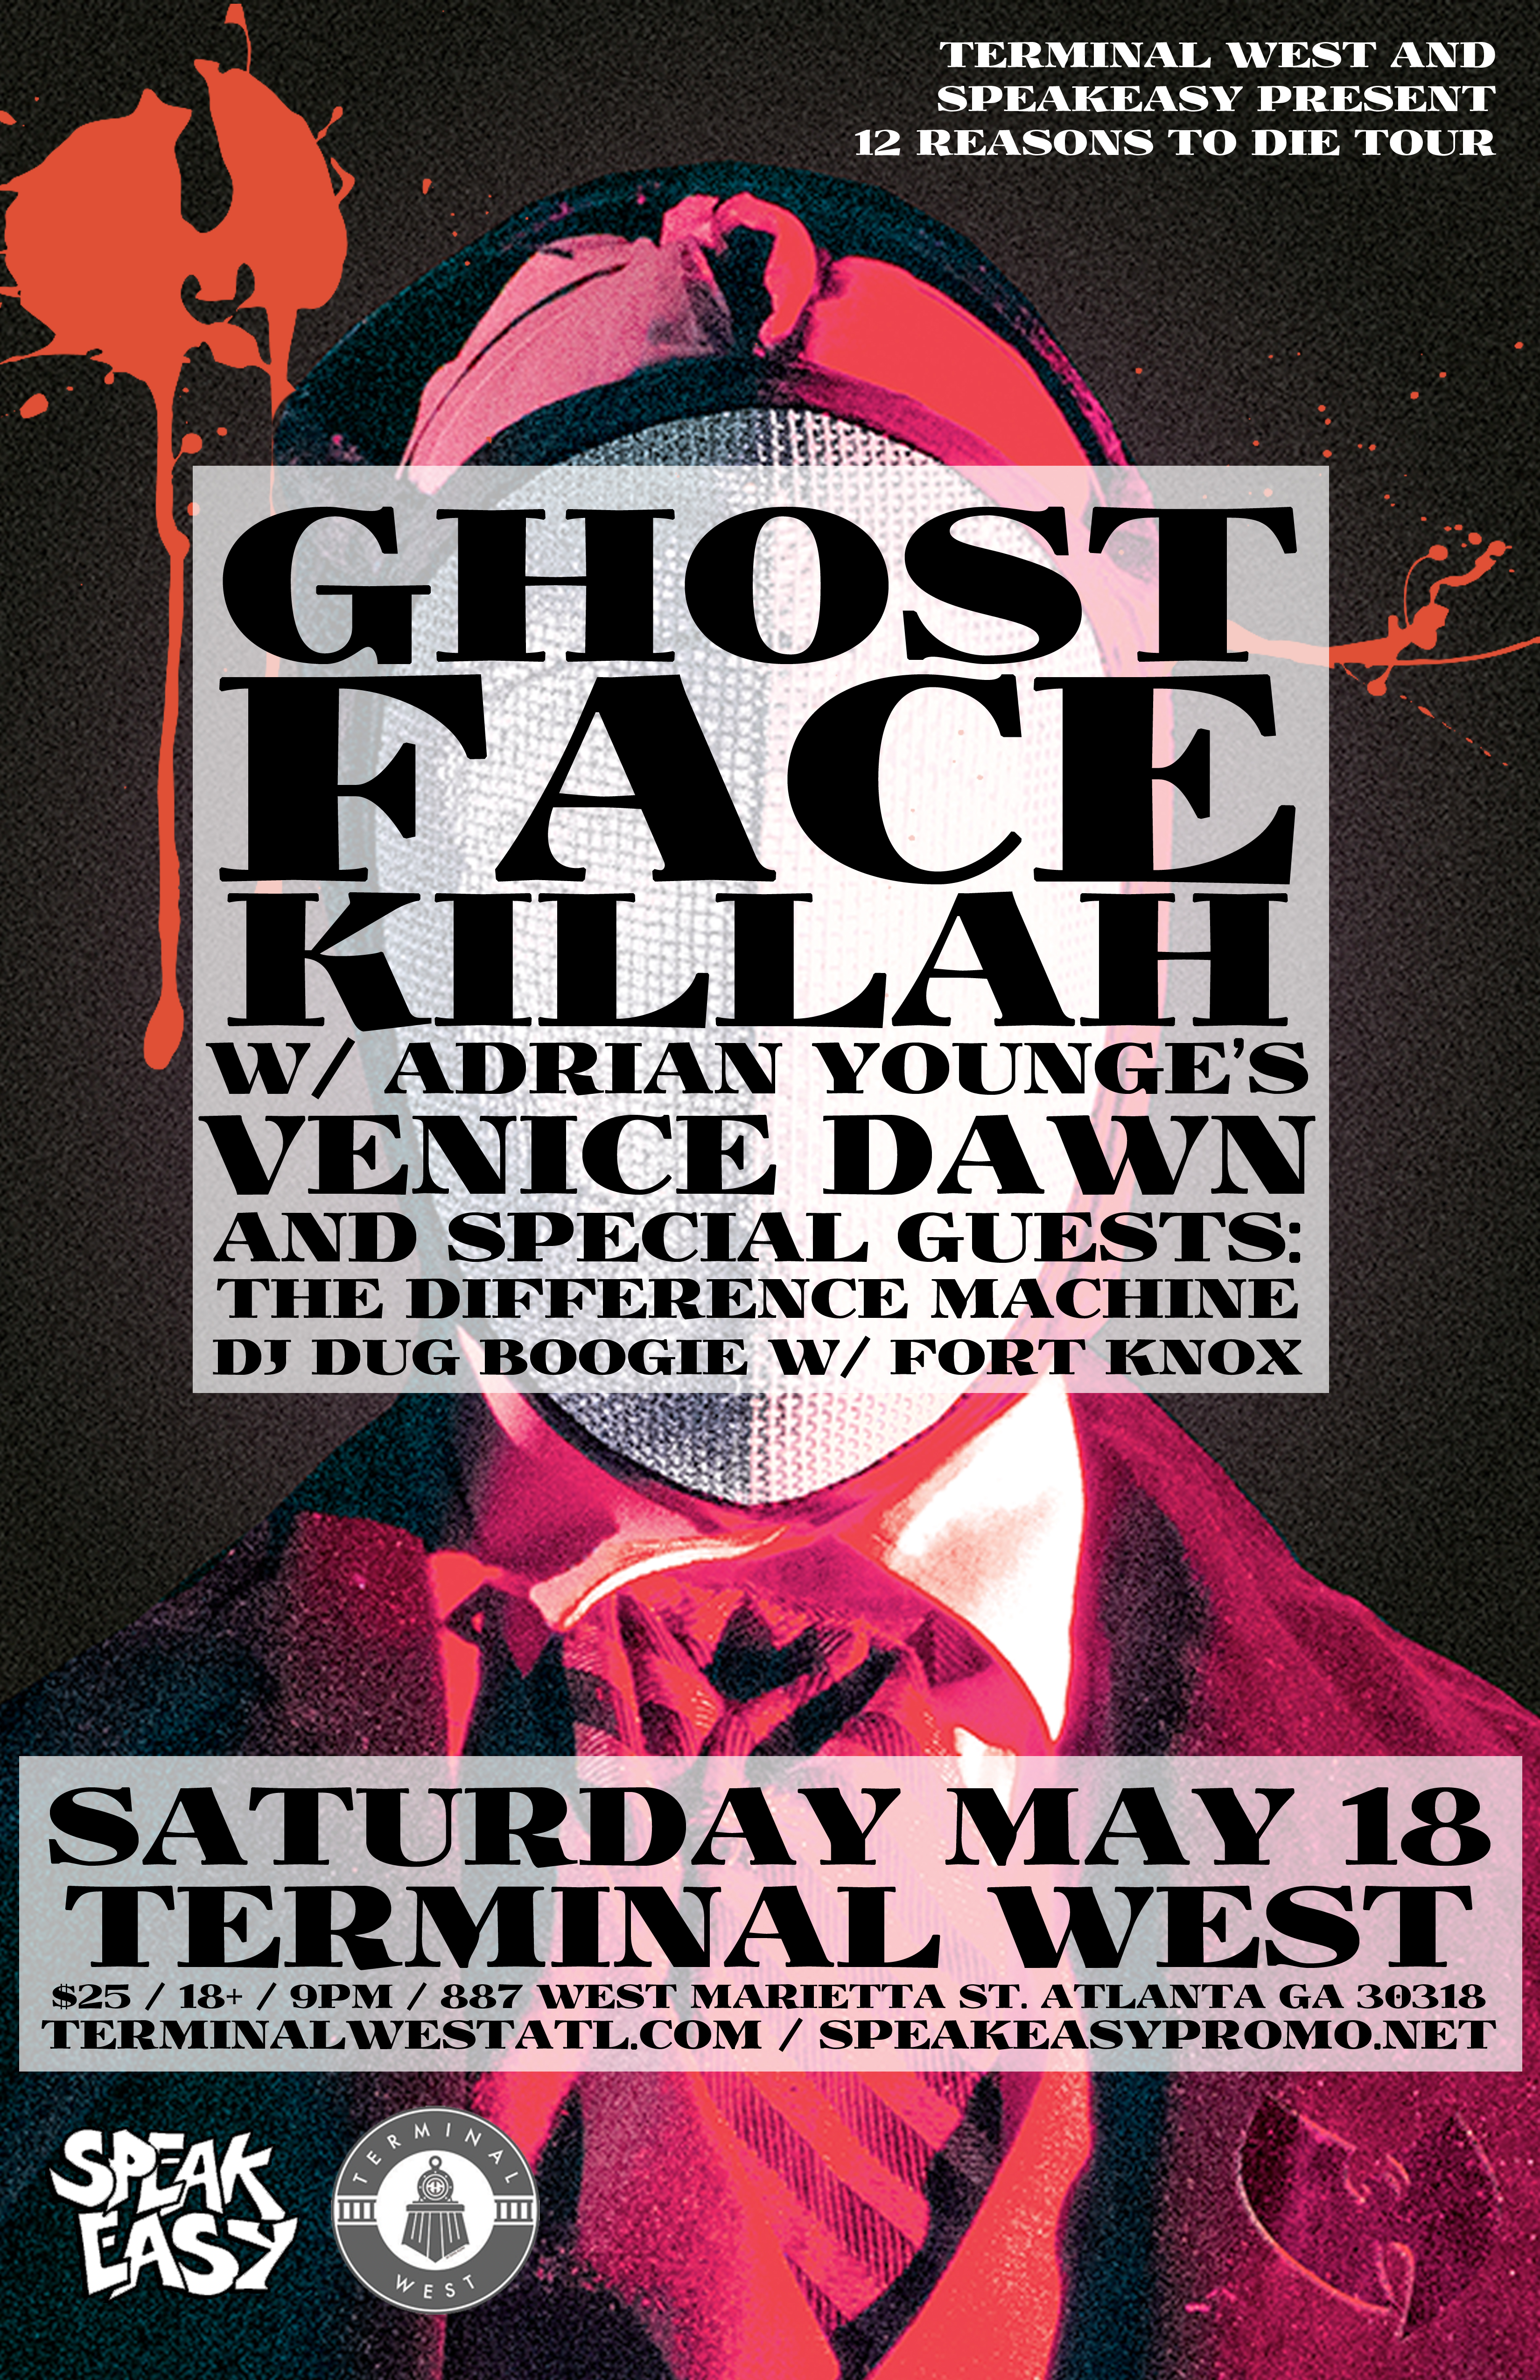 GHOSTFACE KILLAH W/ ADRIAN YOUNGES